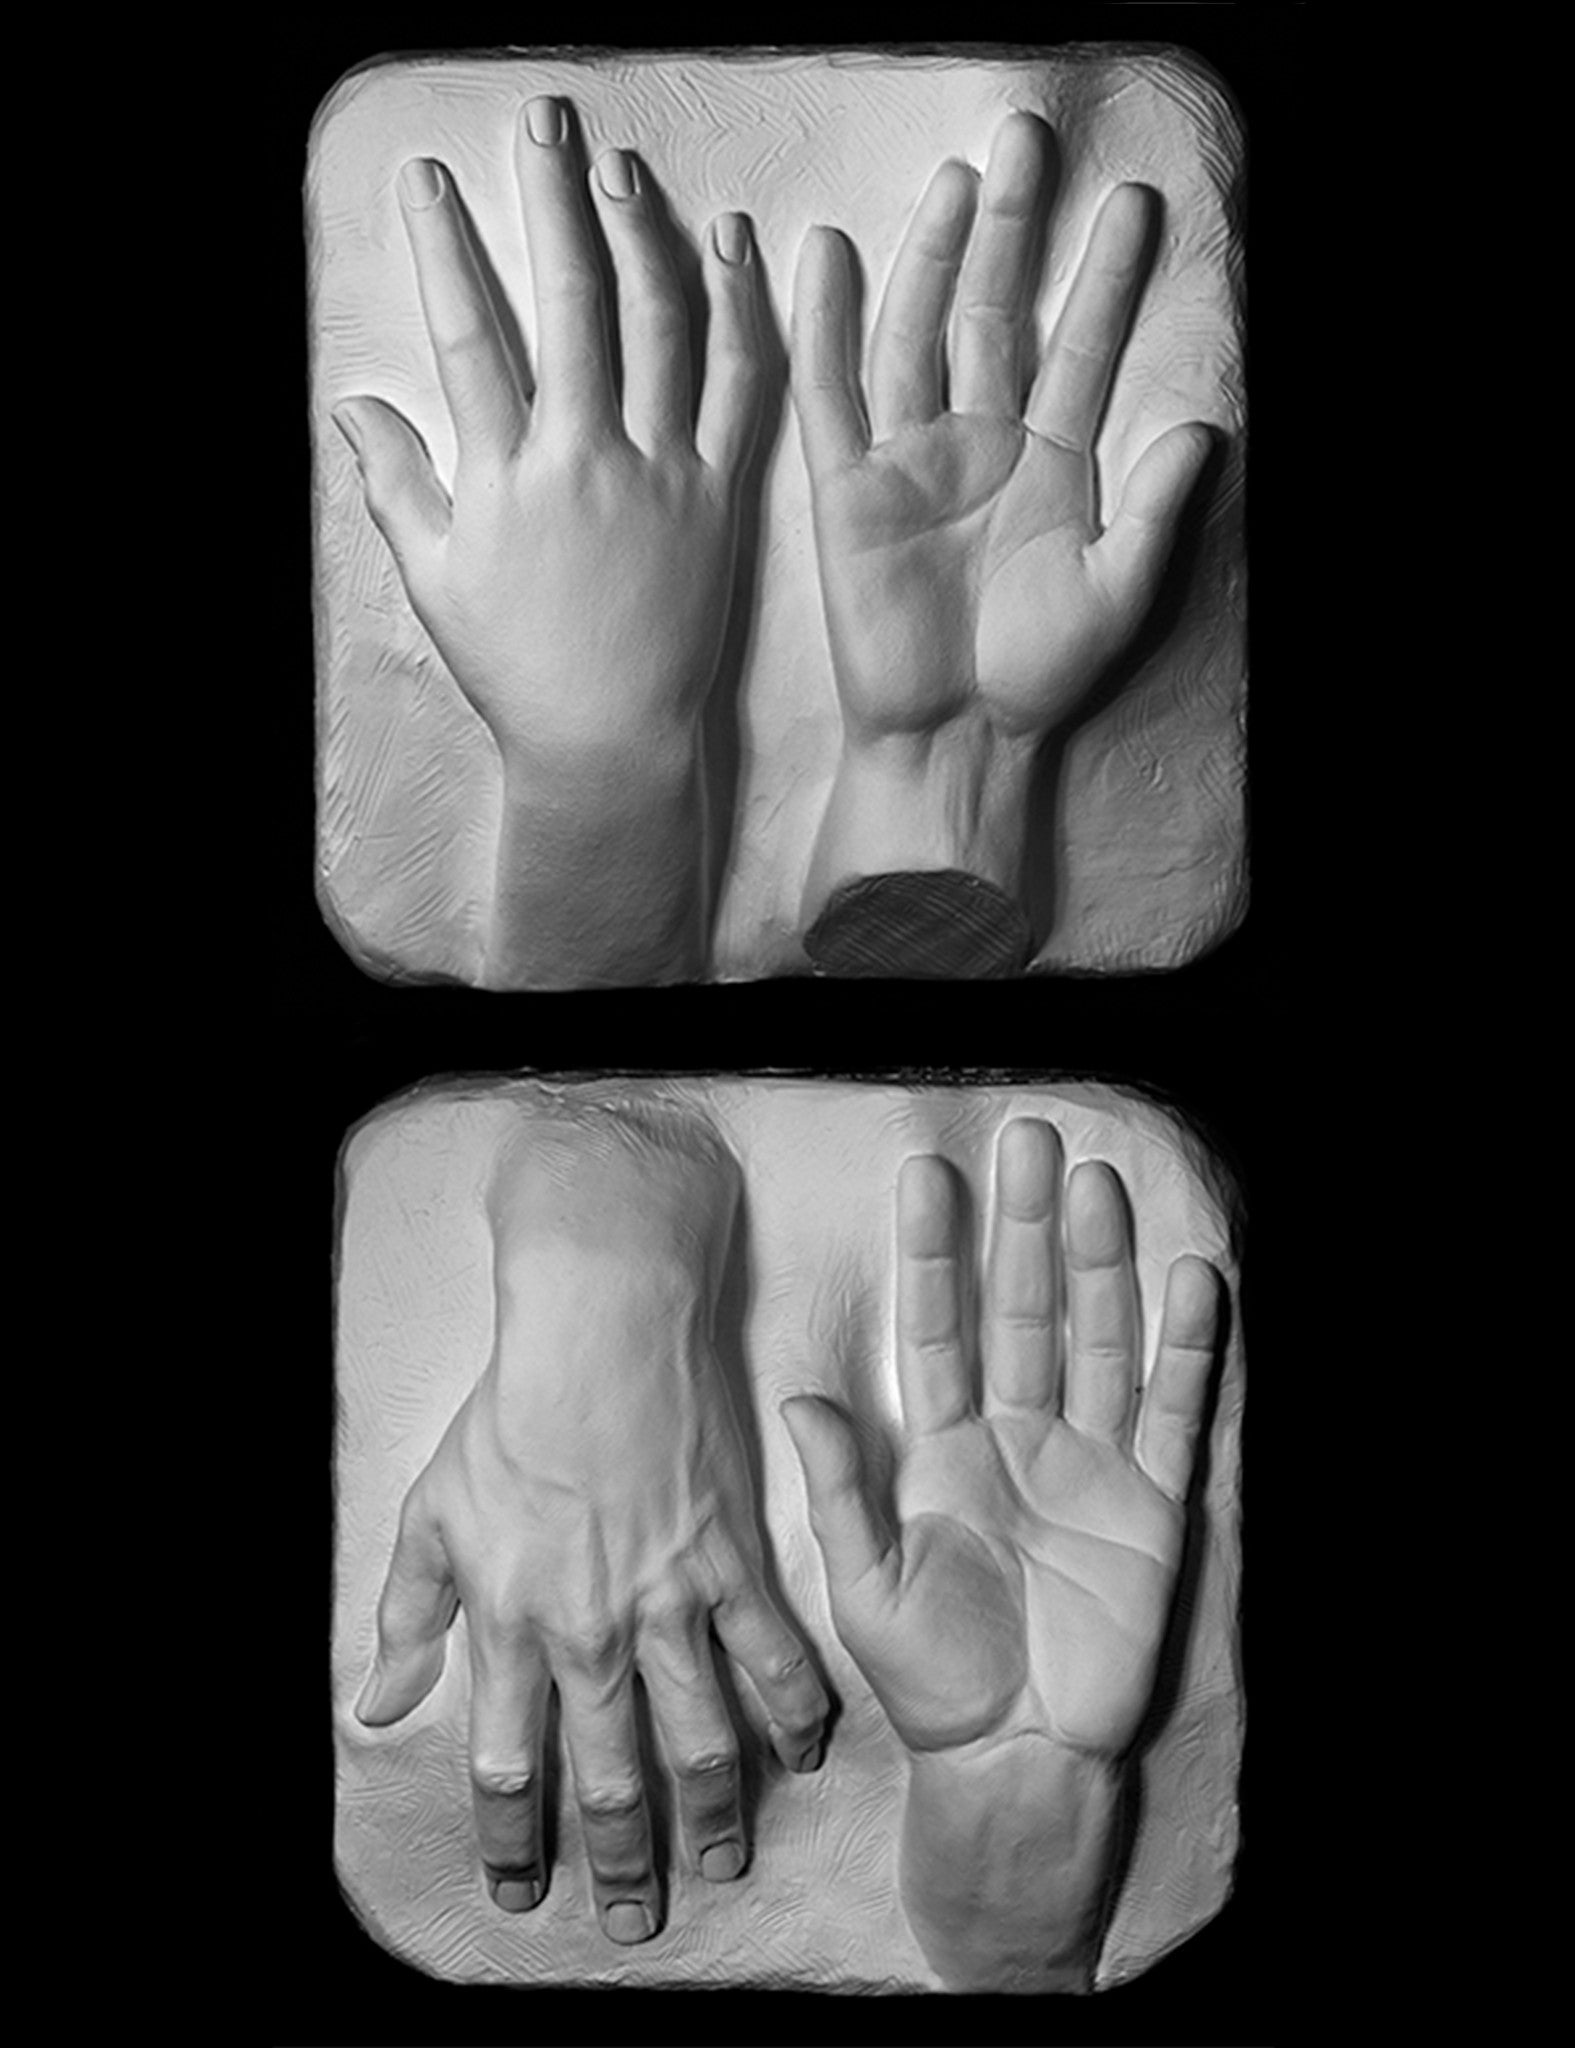 plaster casts for artists, anatomical casts for artists, plaster cast models, art reference casts, artist hand cast reference, drawing cast reference, cast drawing reference